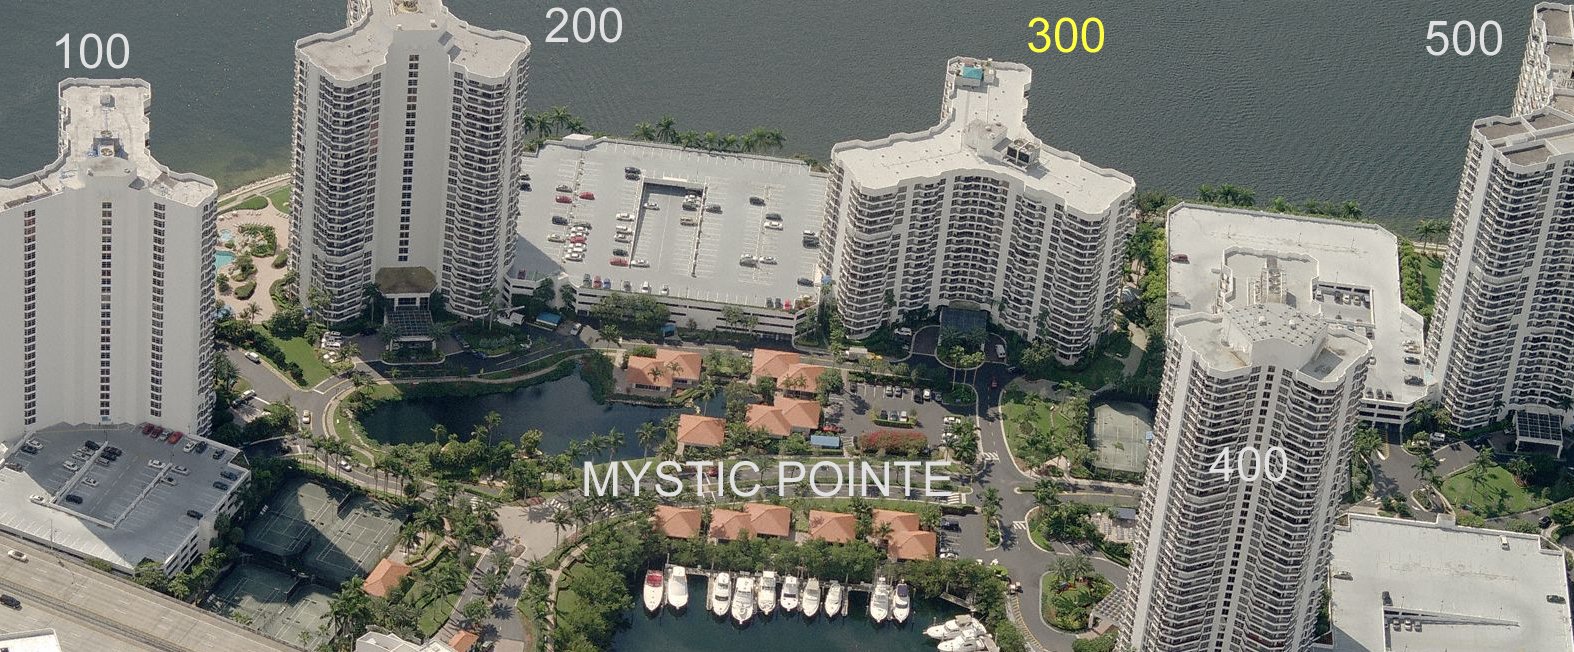 Mystic Pointe Tower 300